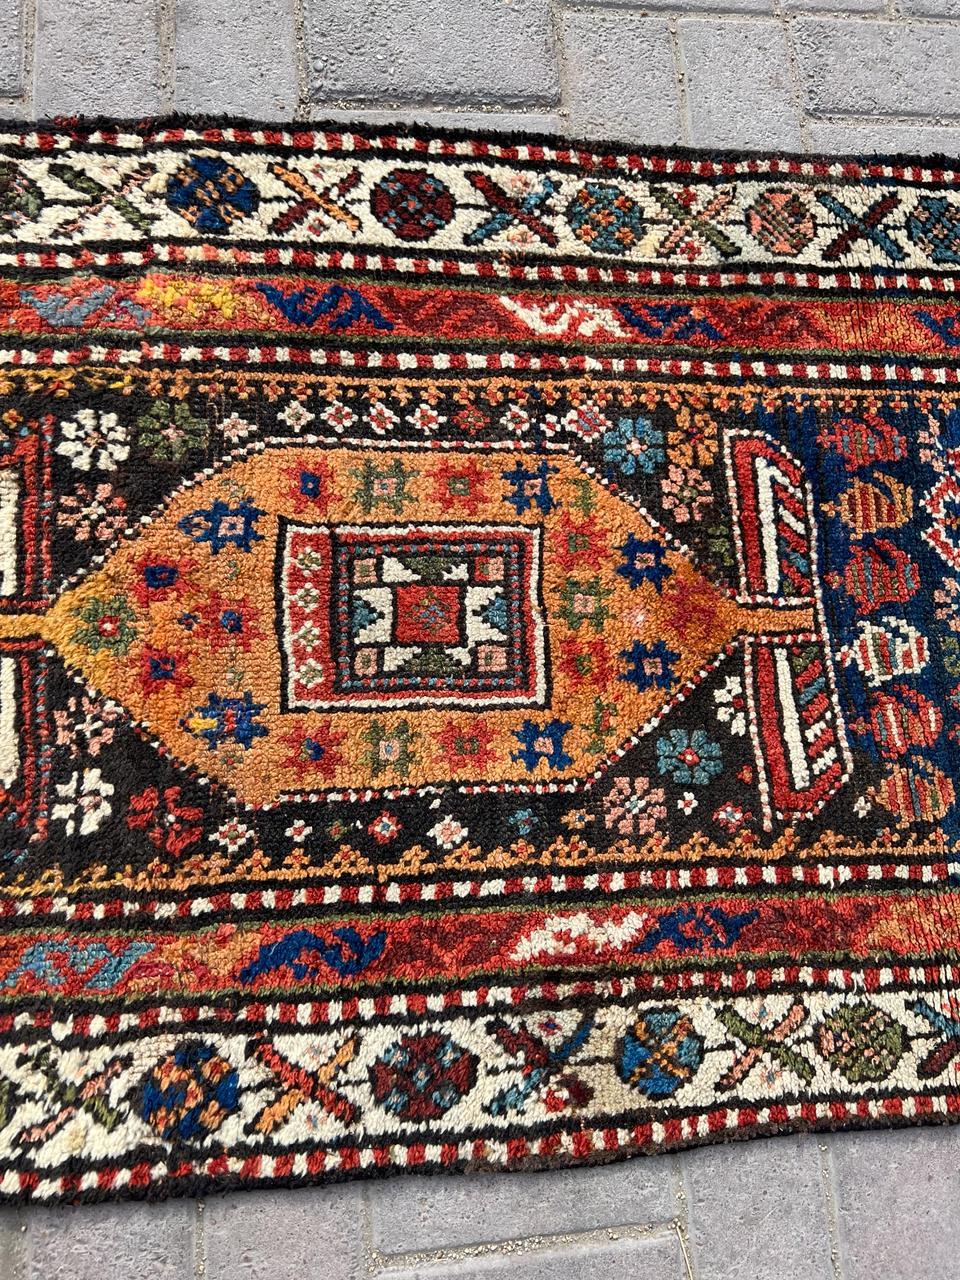 Handmade Antique Persian Kurdish Runner Rug 2.5' x 11.8', 1900s - 2B25 In Good Condition For Sale In Bordeaux, FR